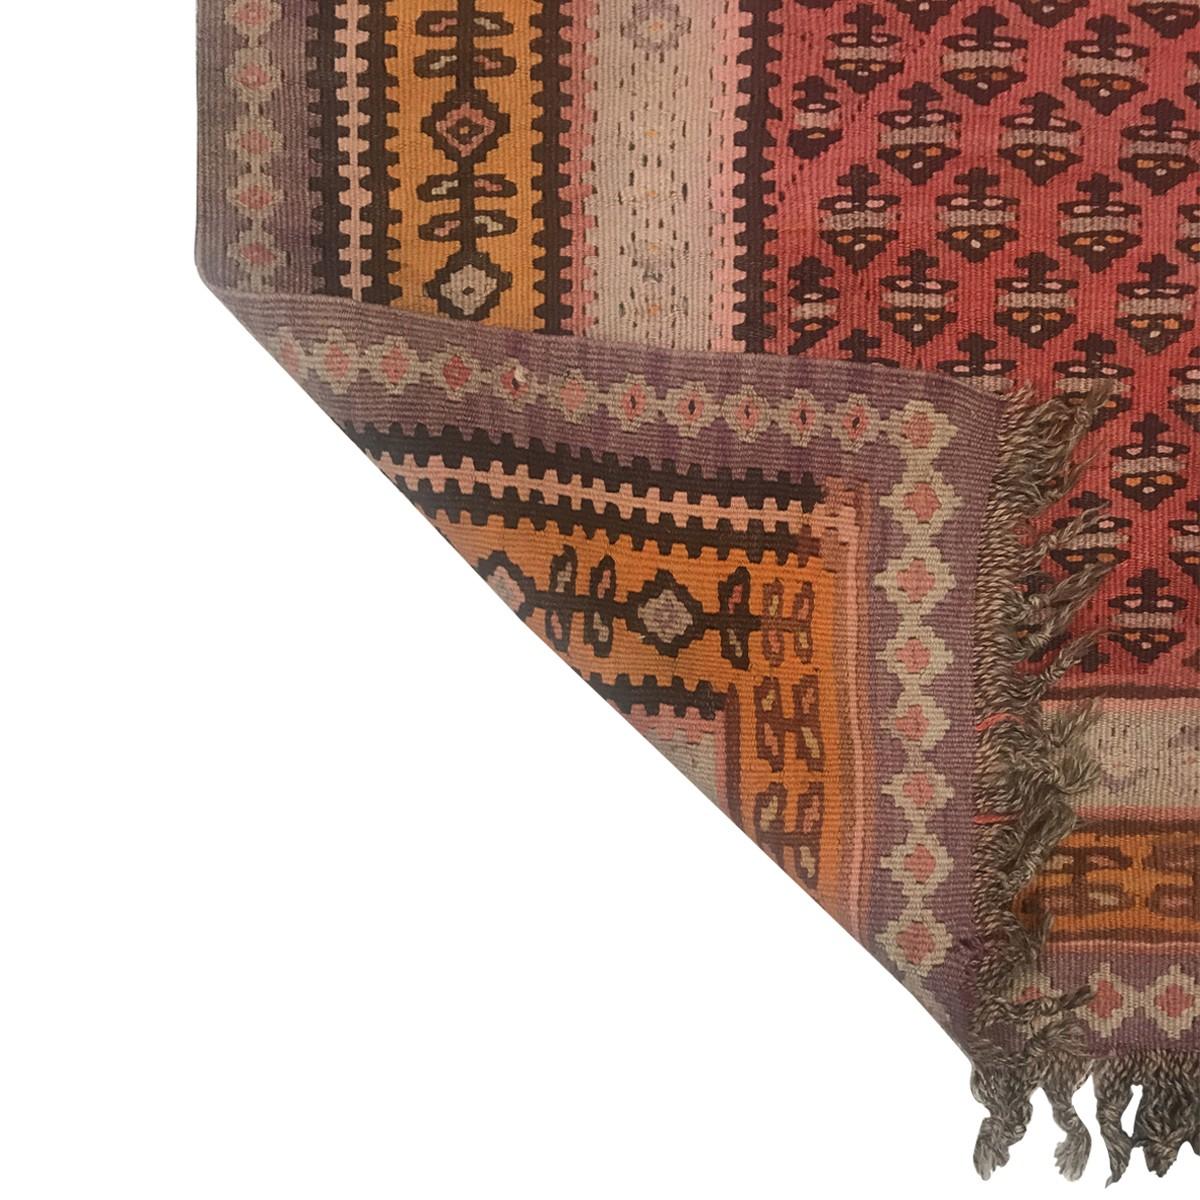 One-of-a kind vintage and antique Ghelims rugs, from Afghanistan, Turkey, Iran, Eastern and Central Asia. These historic rugs, woven between 1890 and 1950, have a contemporary flair for color, alongside their transitional and tribal patterns. Each